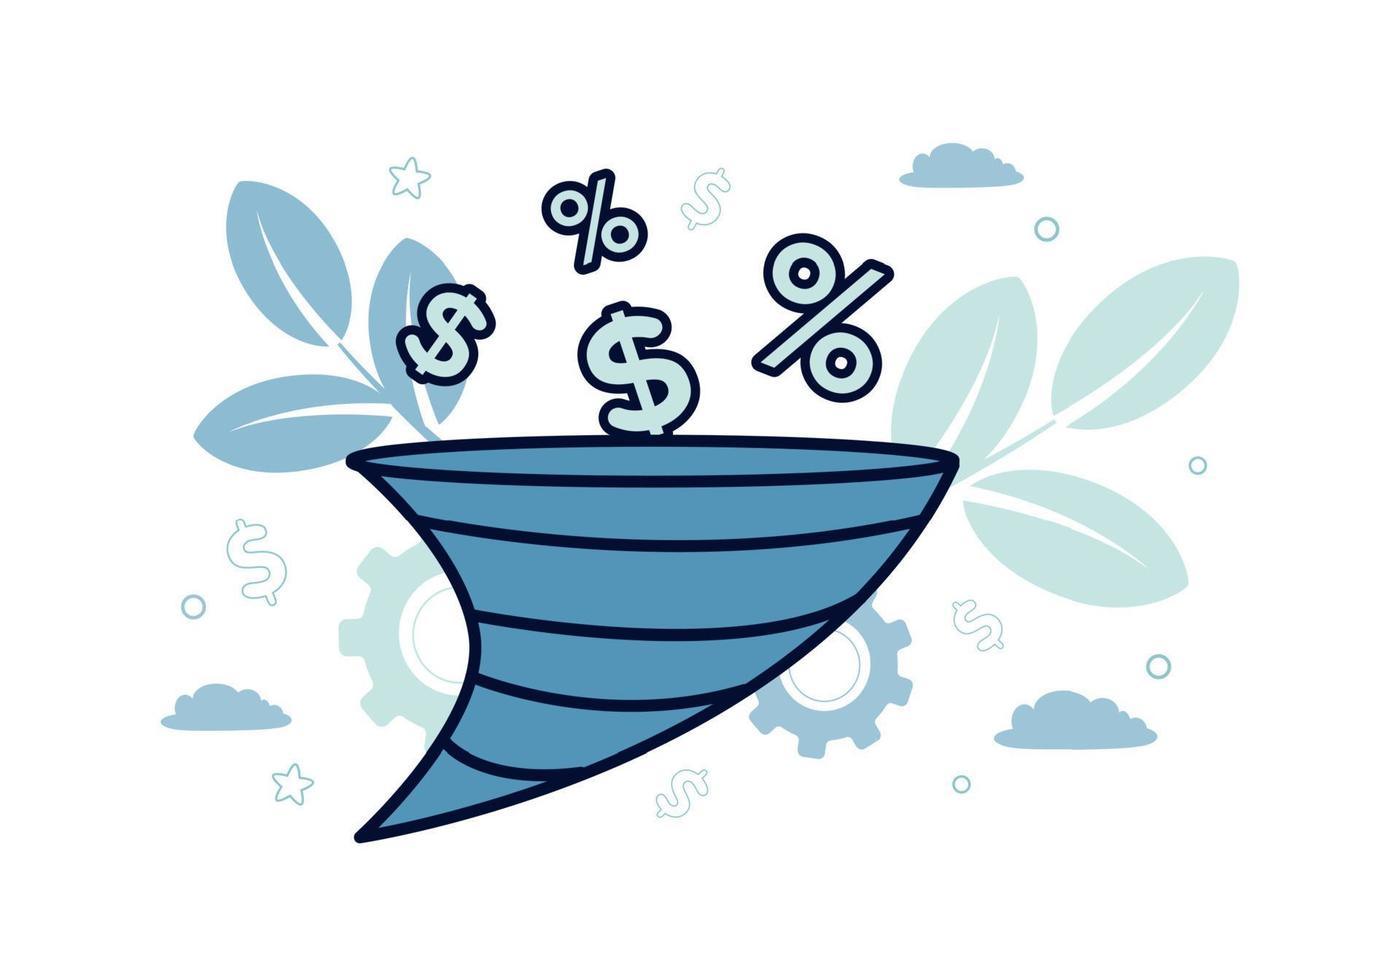 Finance. Vector illustration of default. Funnel with falling dollar and percent icons on the background of gears, plants, leaves, clouds, stars